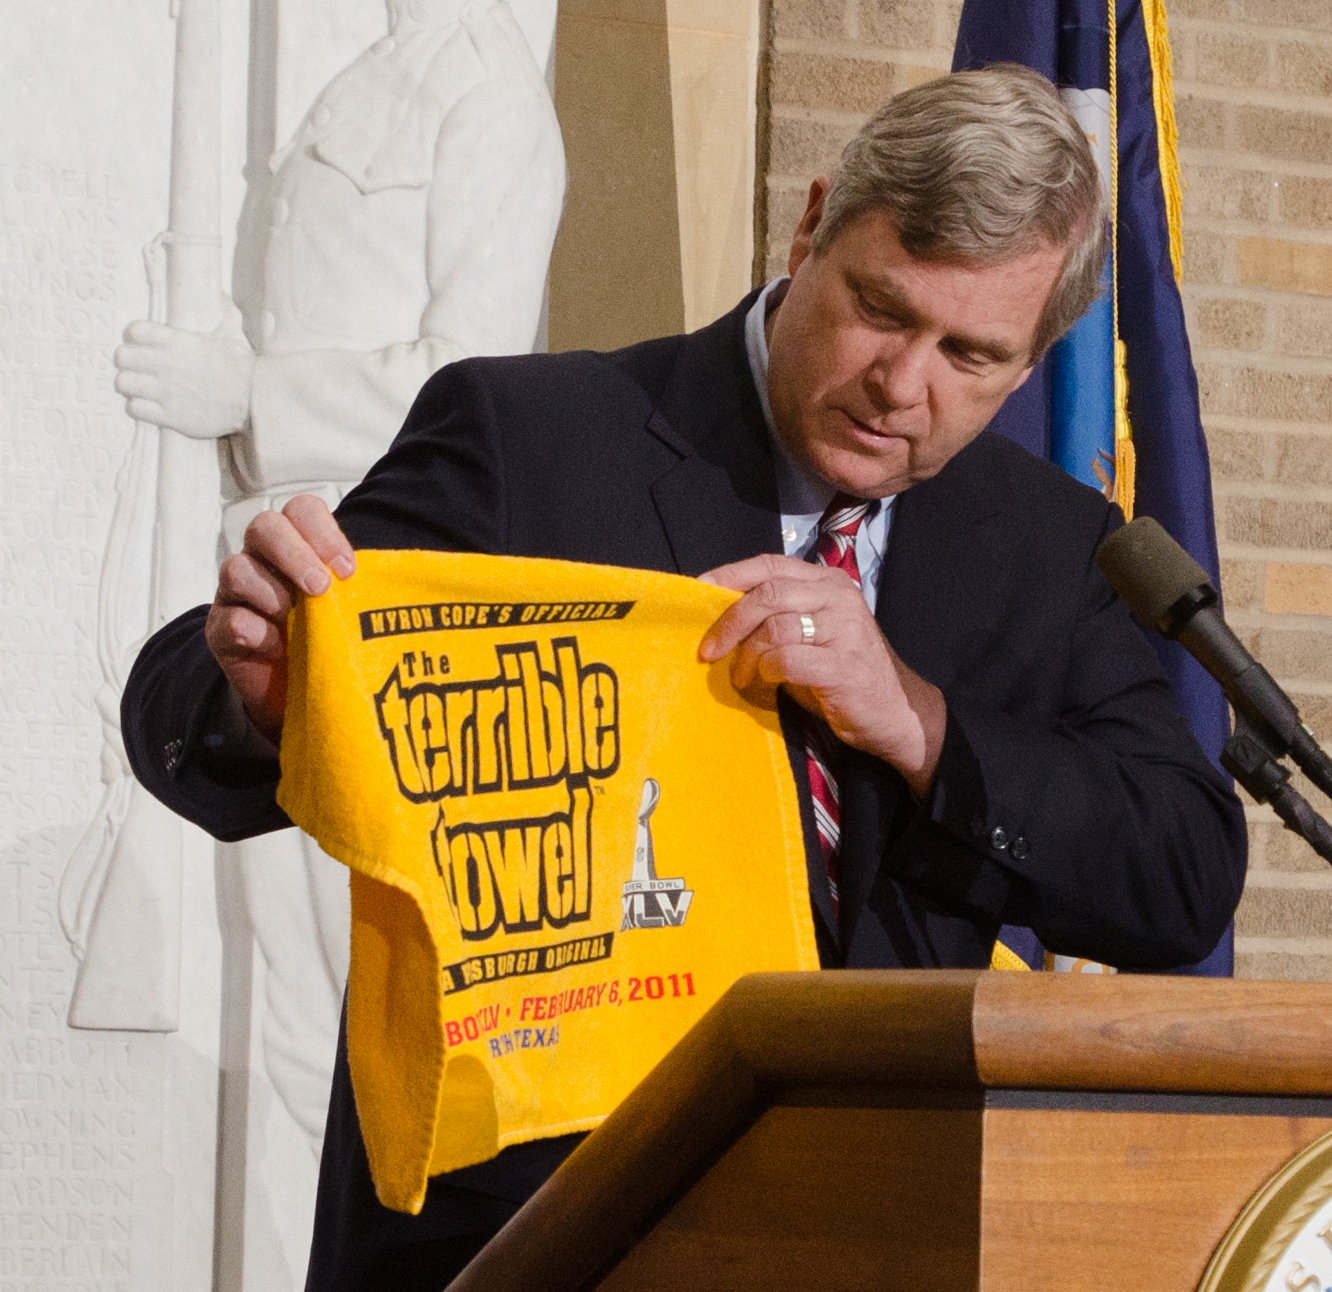 a man standing in front of a podium holding up a yellow bag